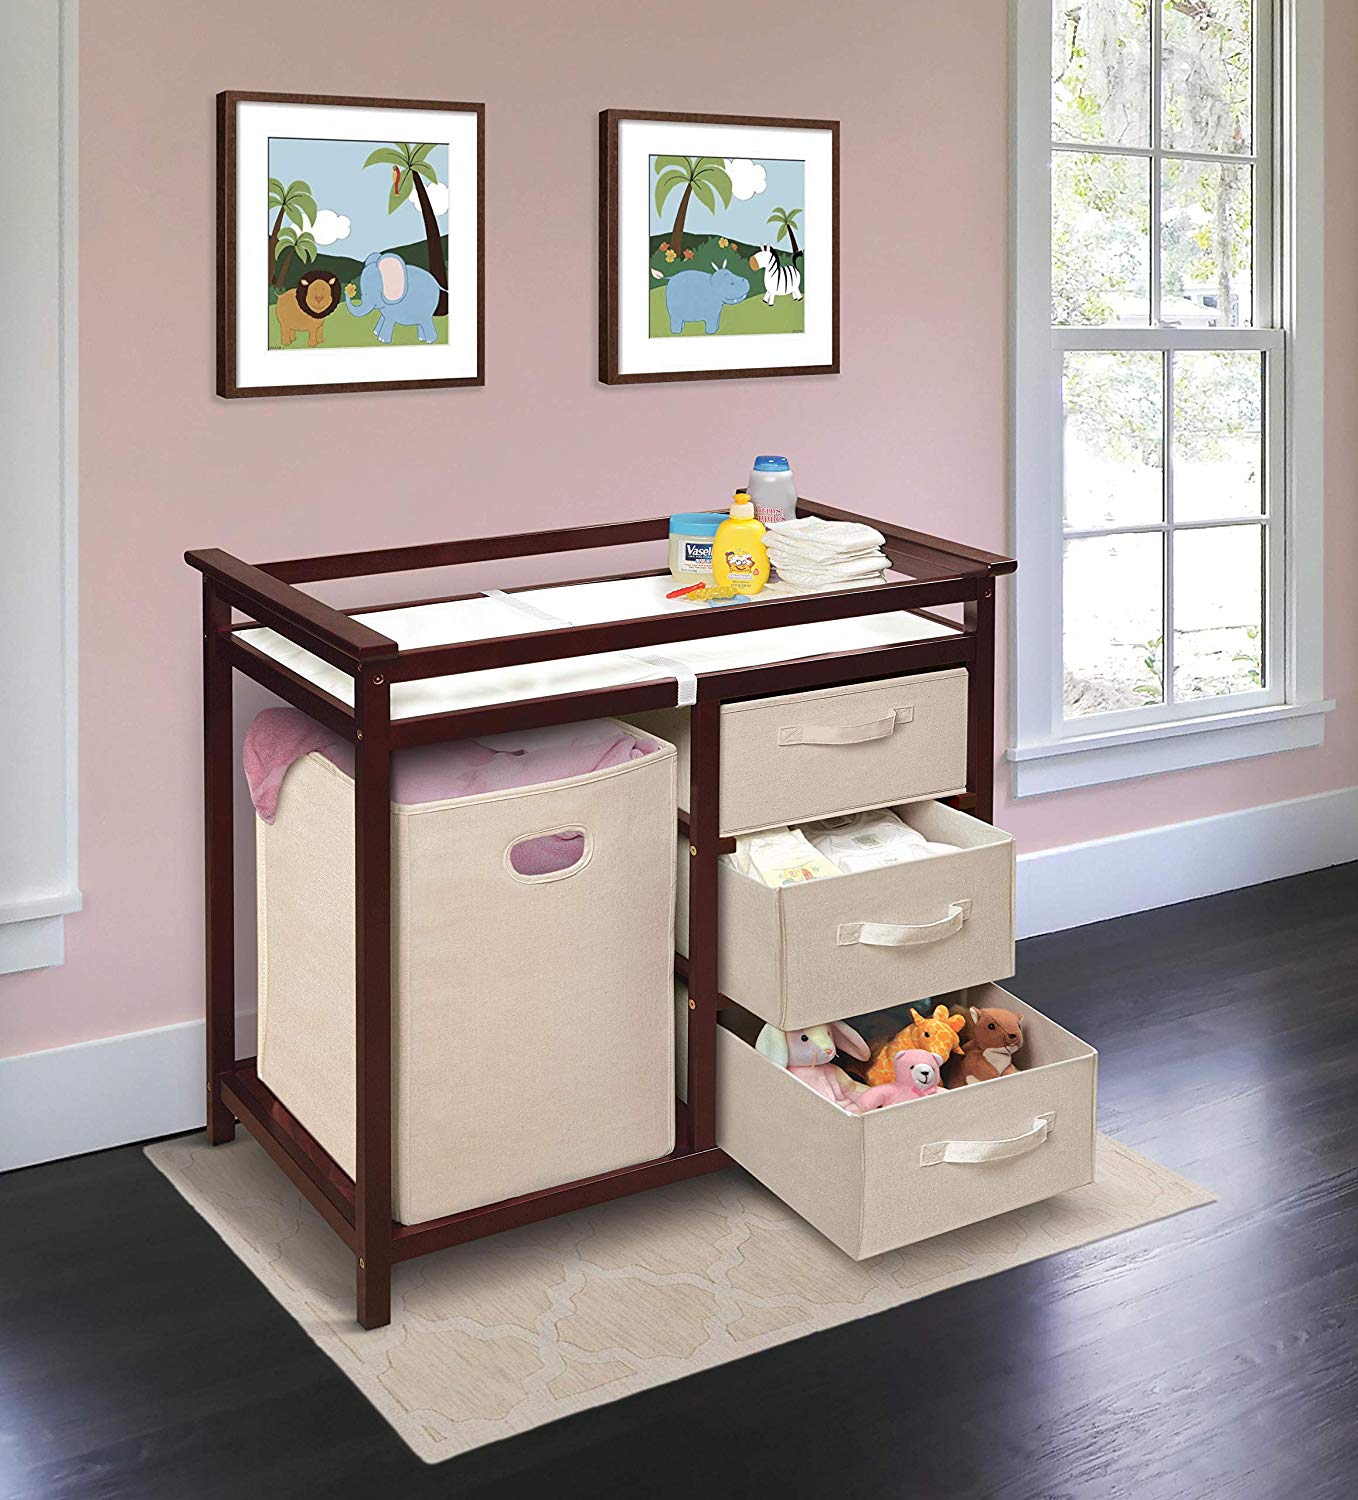 Badger Basket Modern Changing Table with Three Baskets & Hamper-Finish:Cherry - image 5 of 7